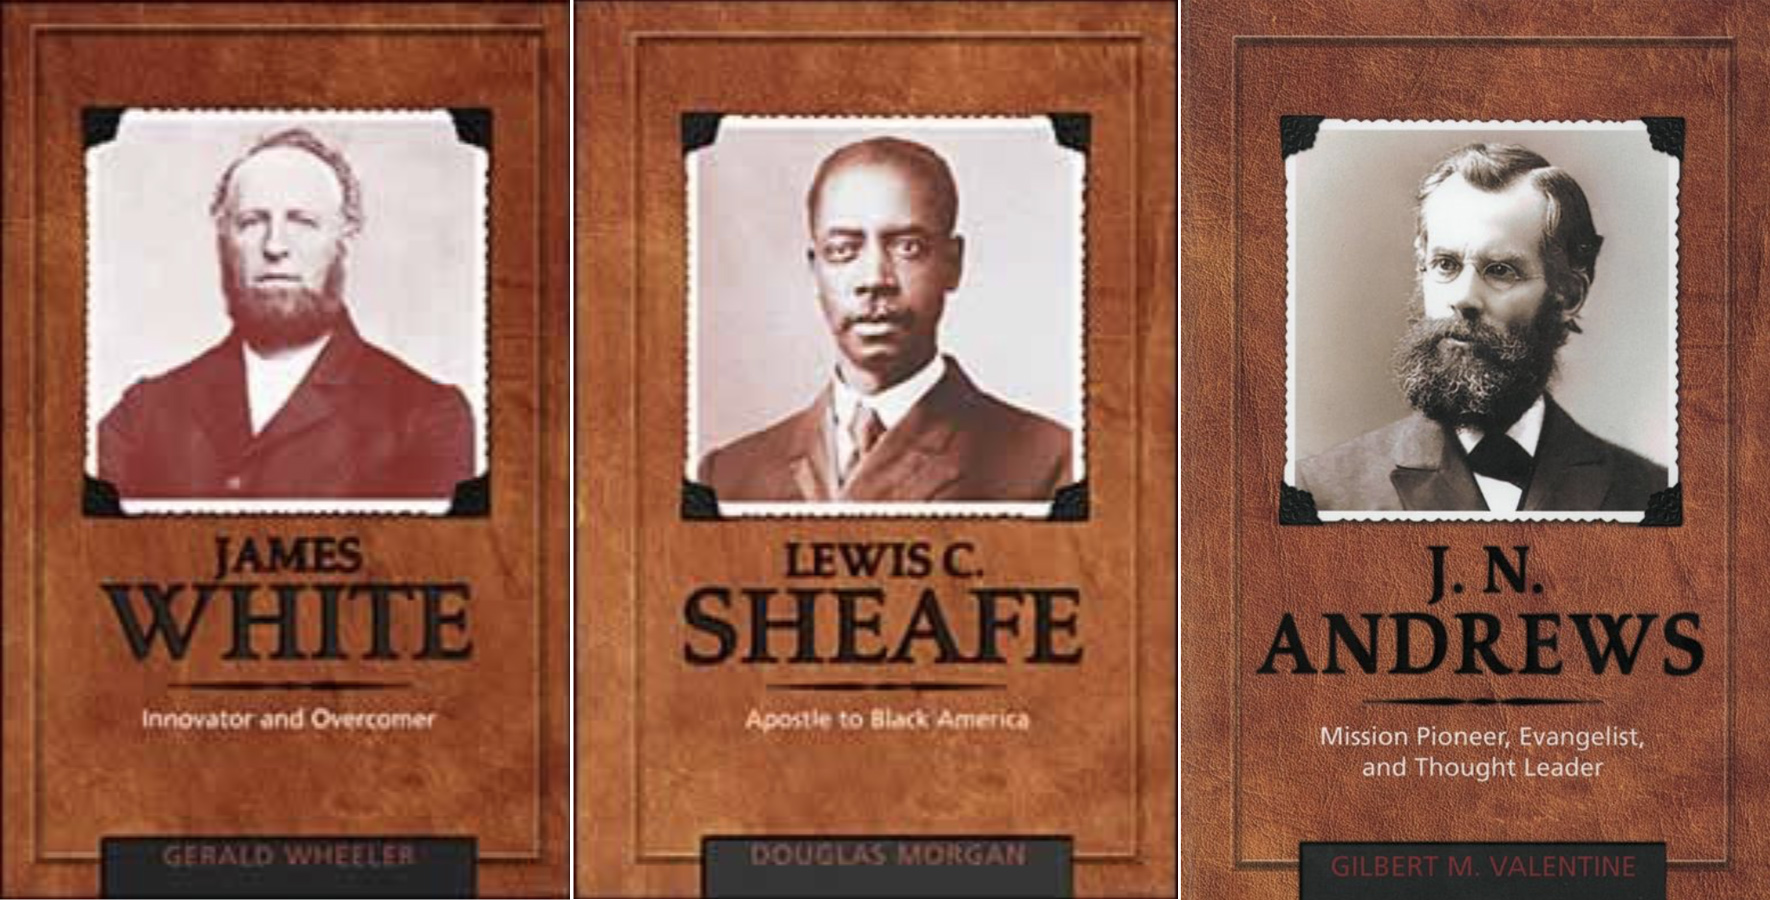 Adventist Biography Series three covers